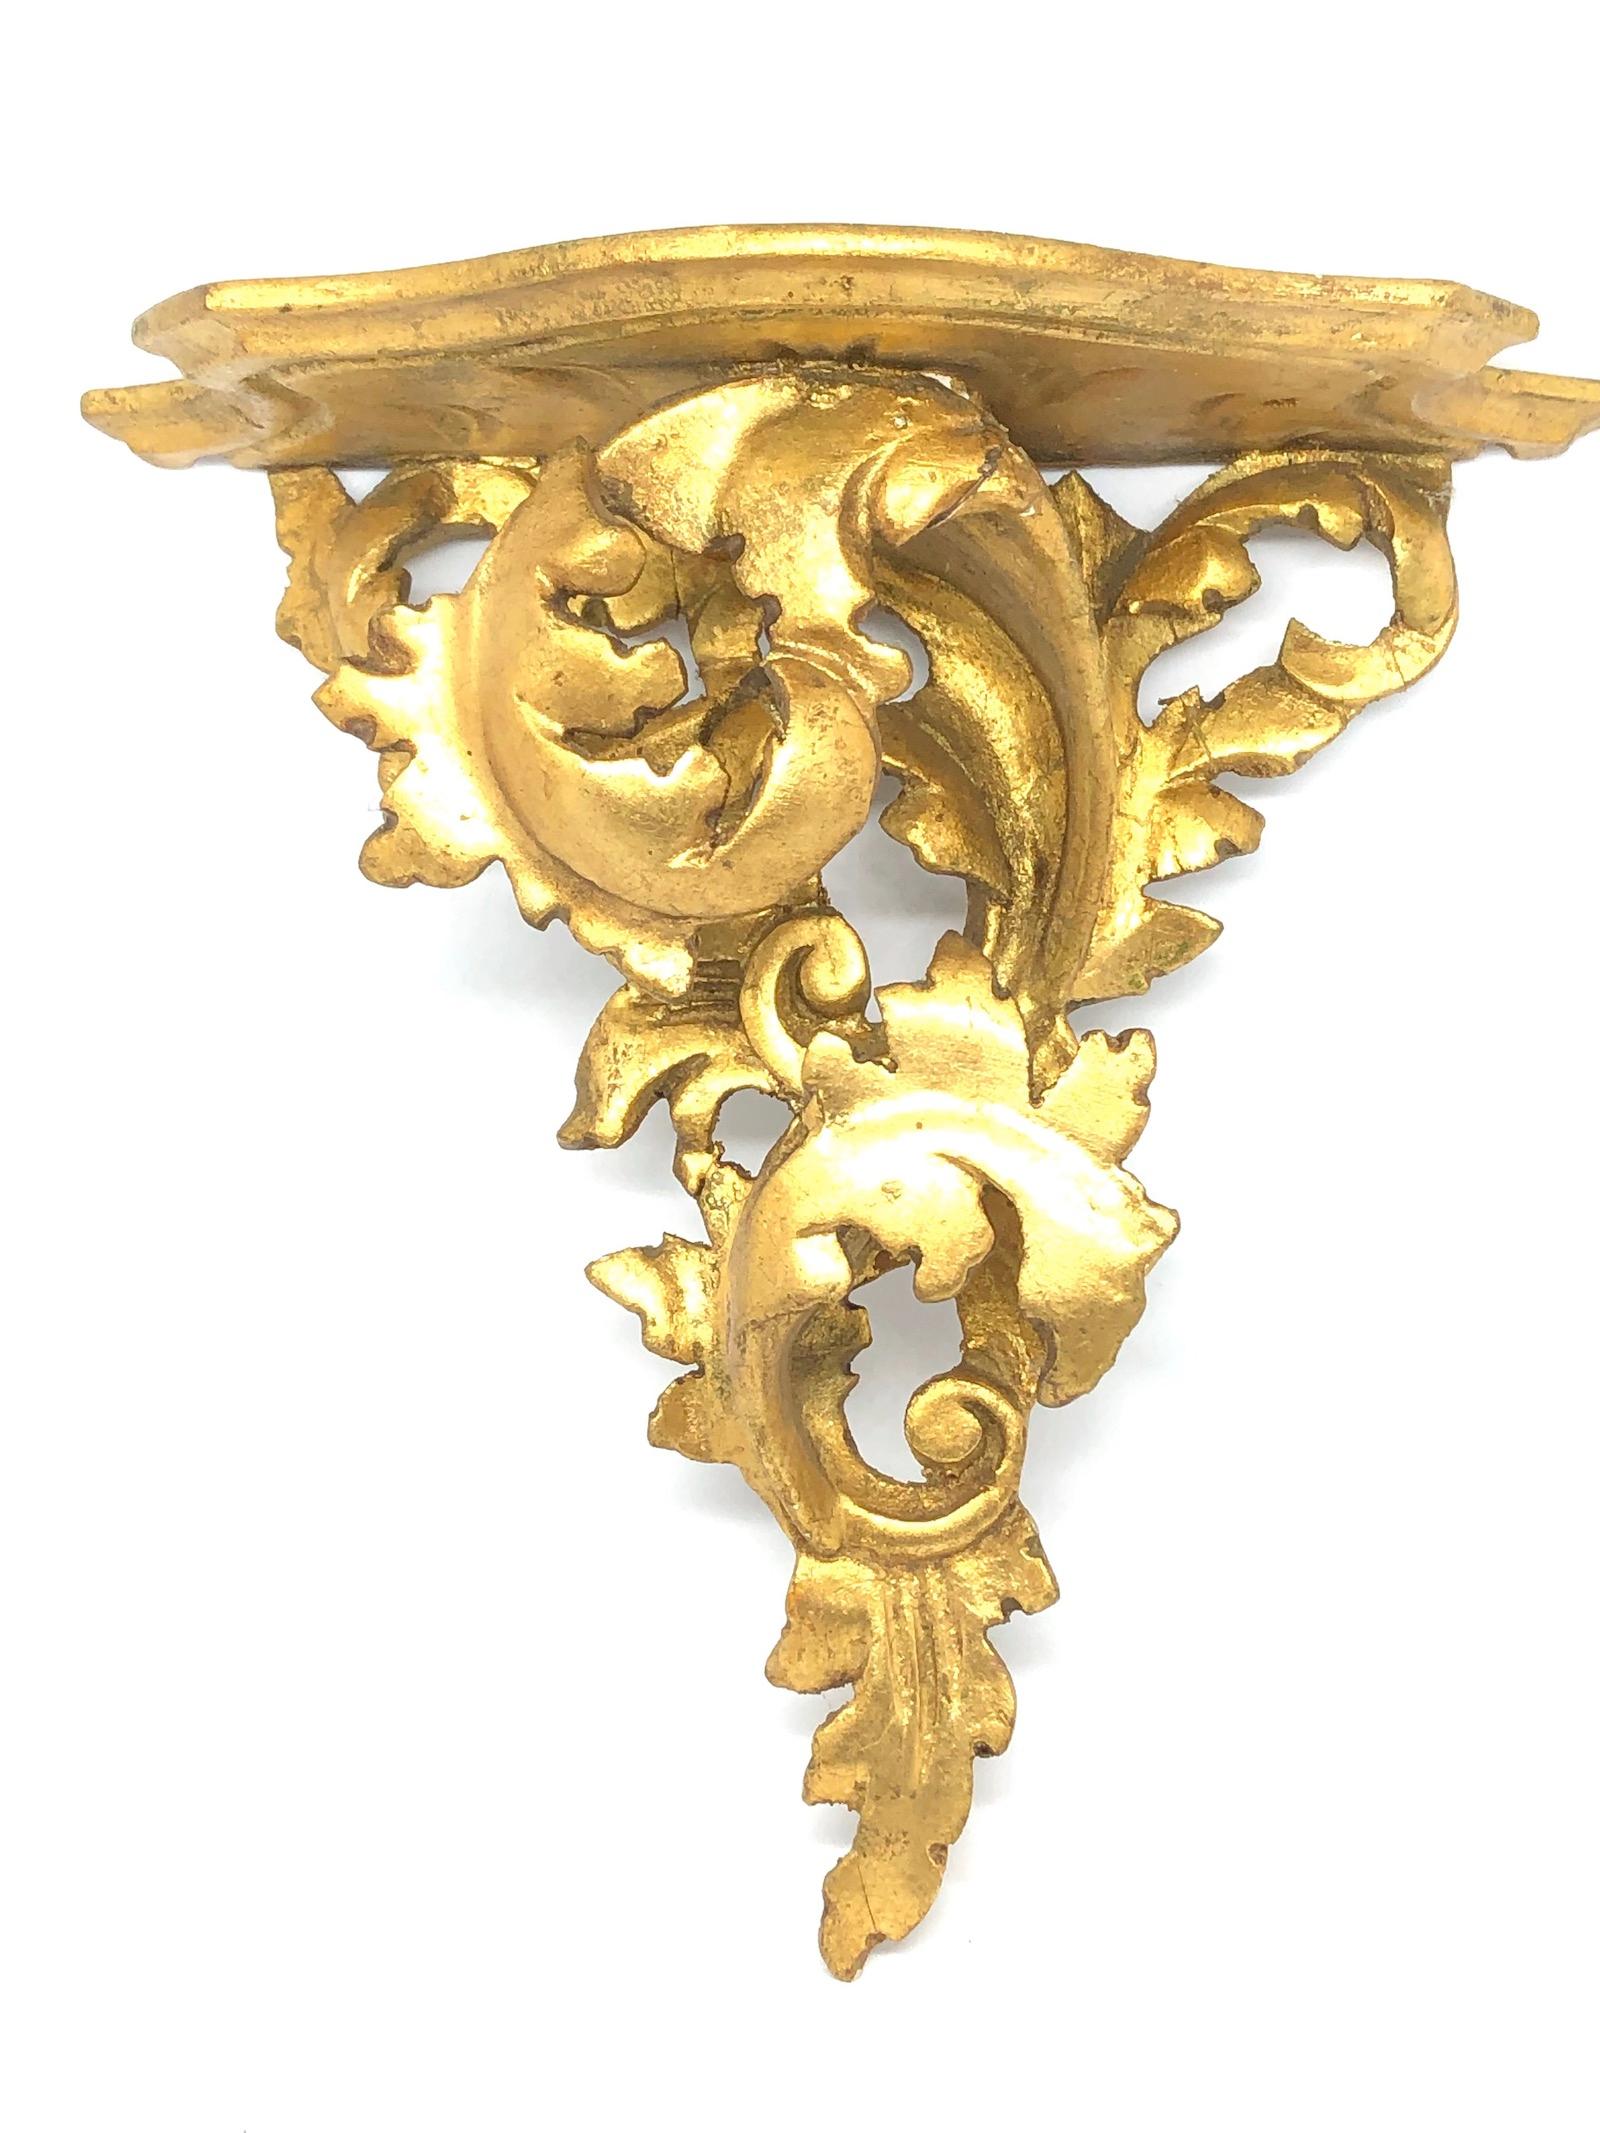 Offered is an absolutely stunning, 1950s Italian giltwood wall shelf or wall console. Minor patina and paint lost gives this piece a classy statement. Made of hand carved wood and gold plated. A nice shelf to present a statuette or a beautiful